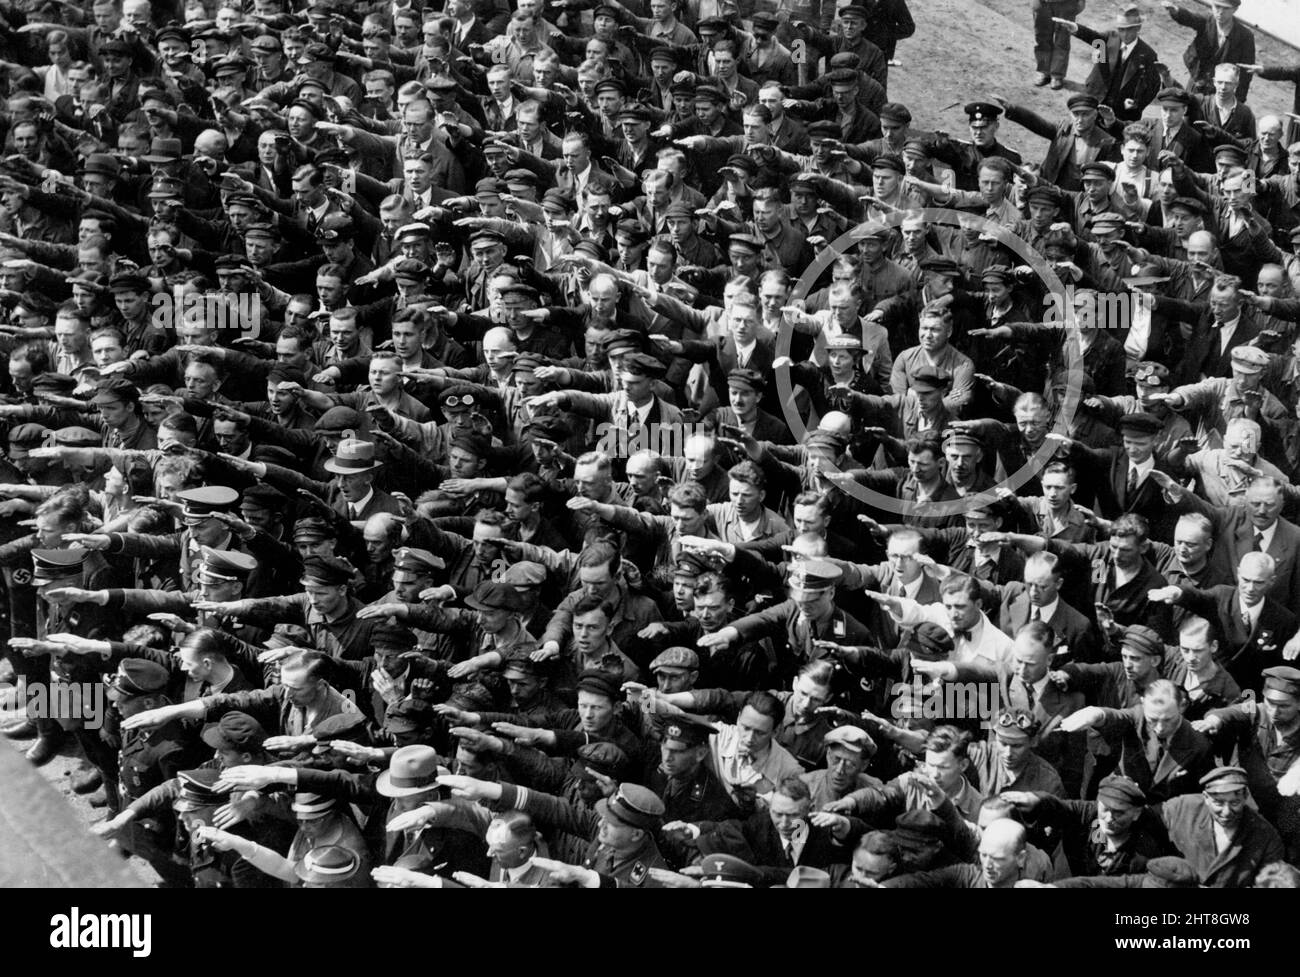 Picture of people giving a Nazi salute, with an unidentified person (possibly August Landmesser or Gustav Wegert) refusing to do so - 1936 Stock Photo